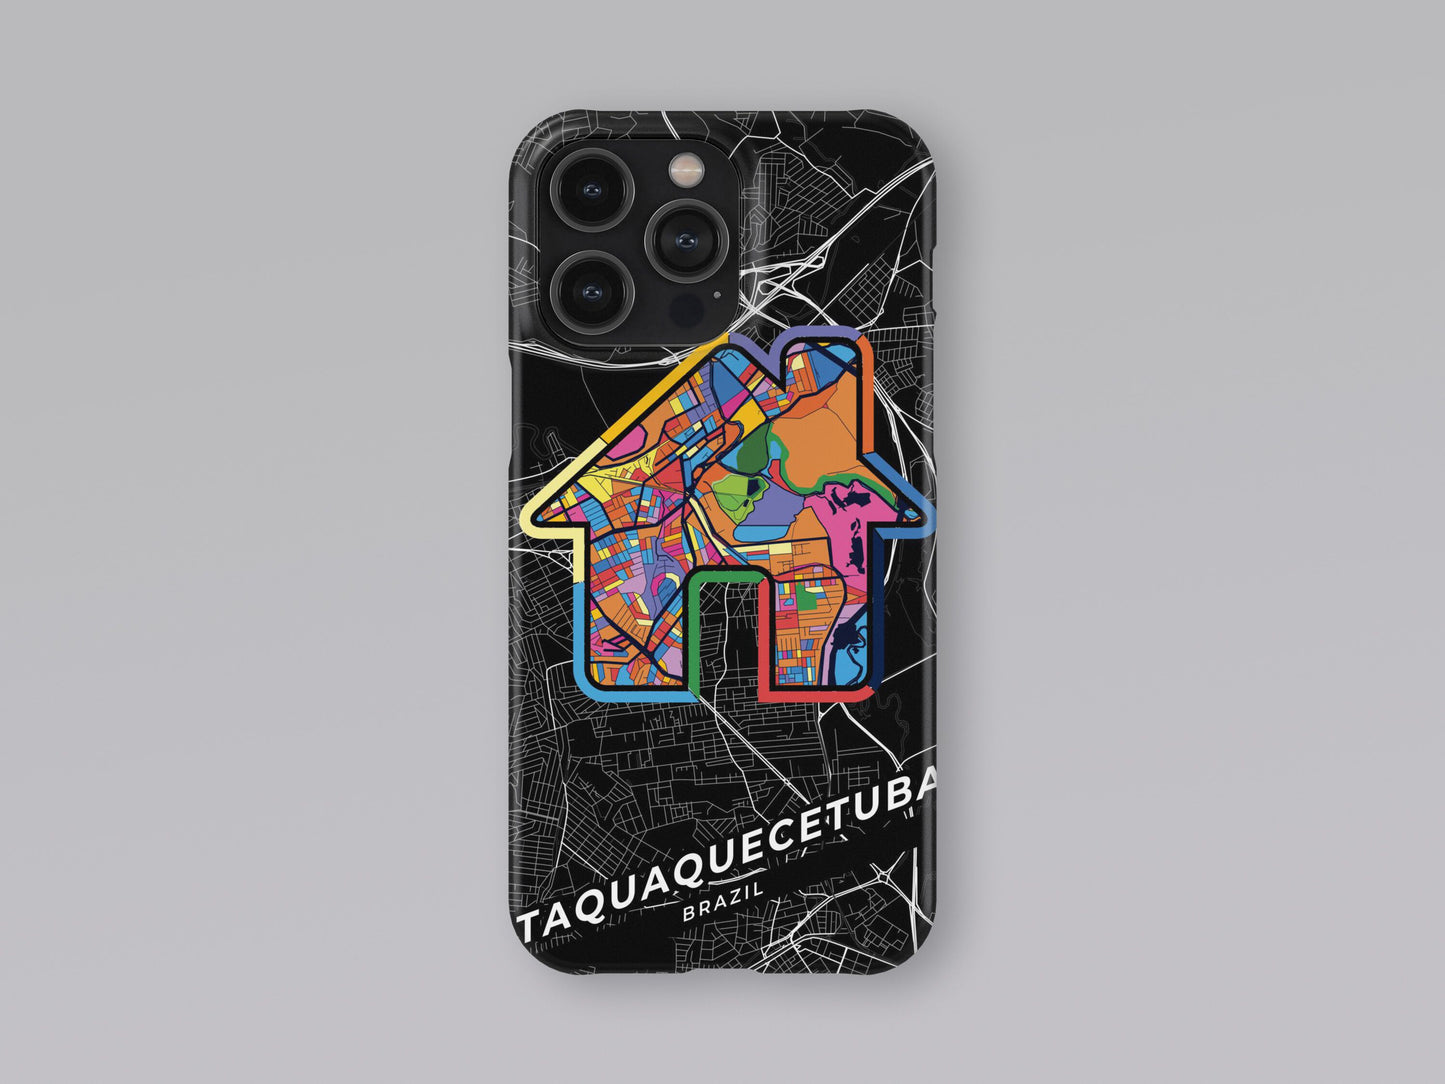 Itaquaquecetuba Brazil slim phone case with colorful icon. Birthday, wedding or housewarming gift. Couple match cases. 3